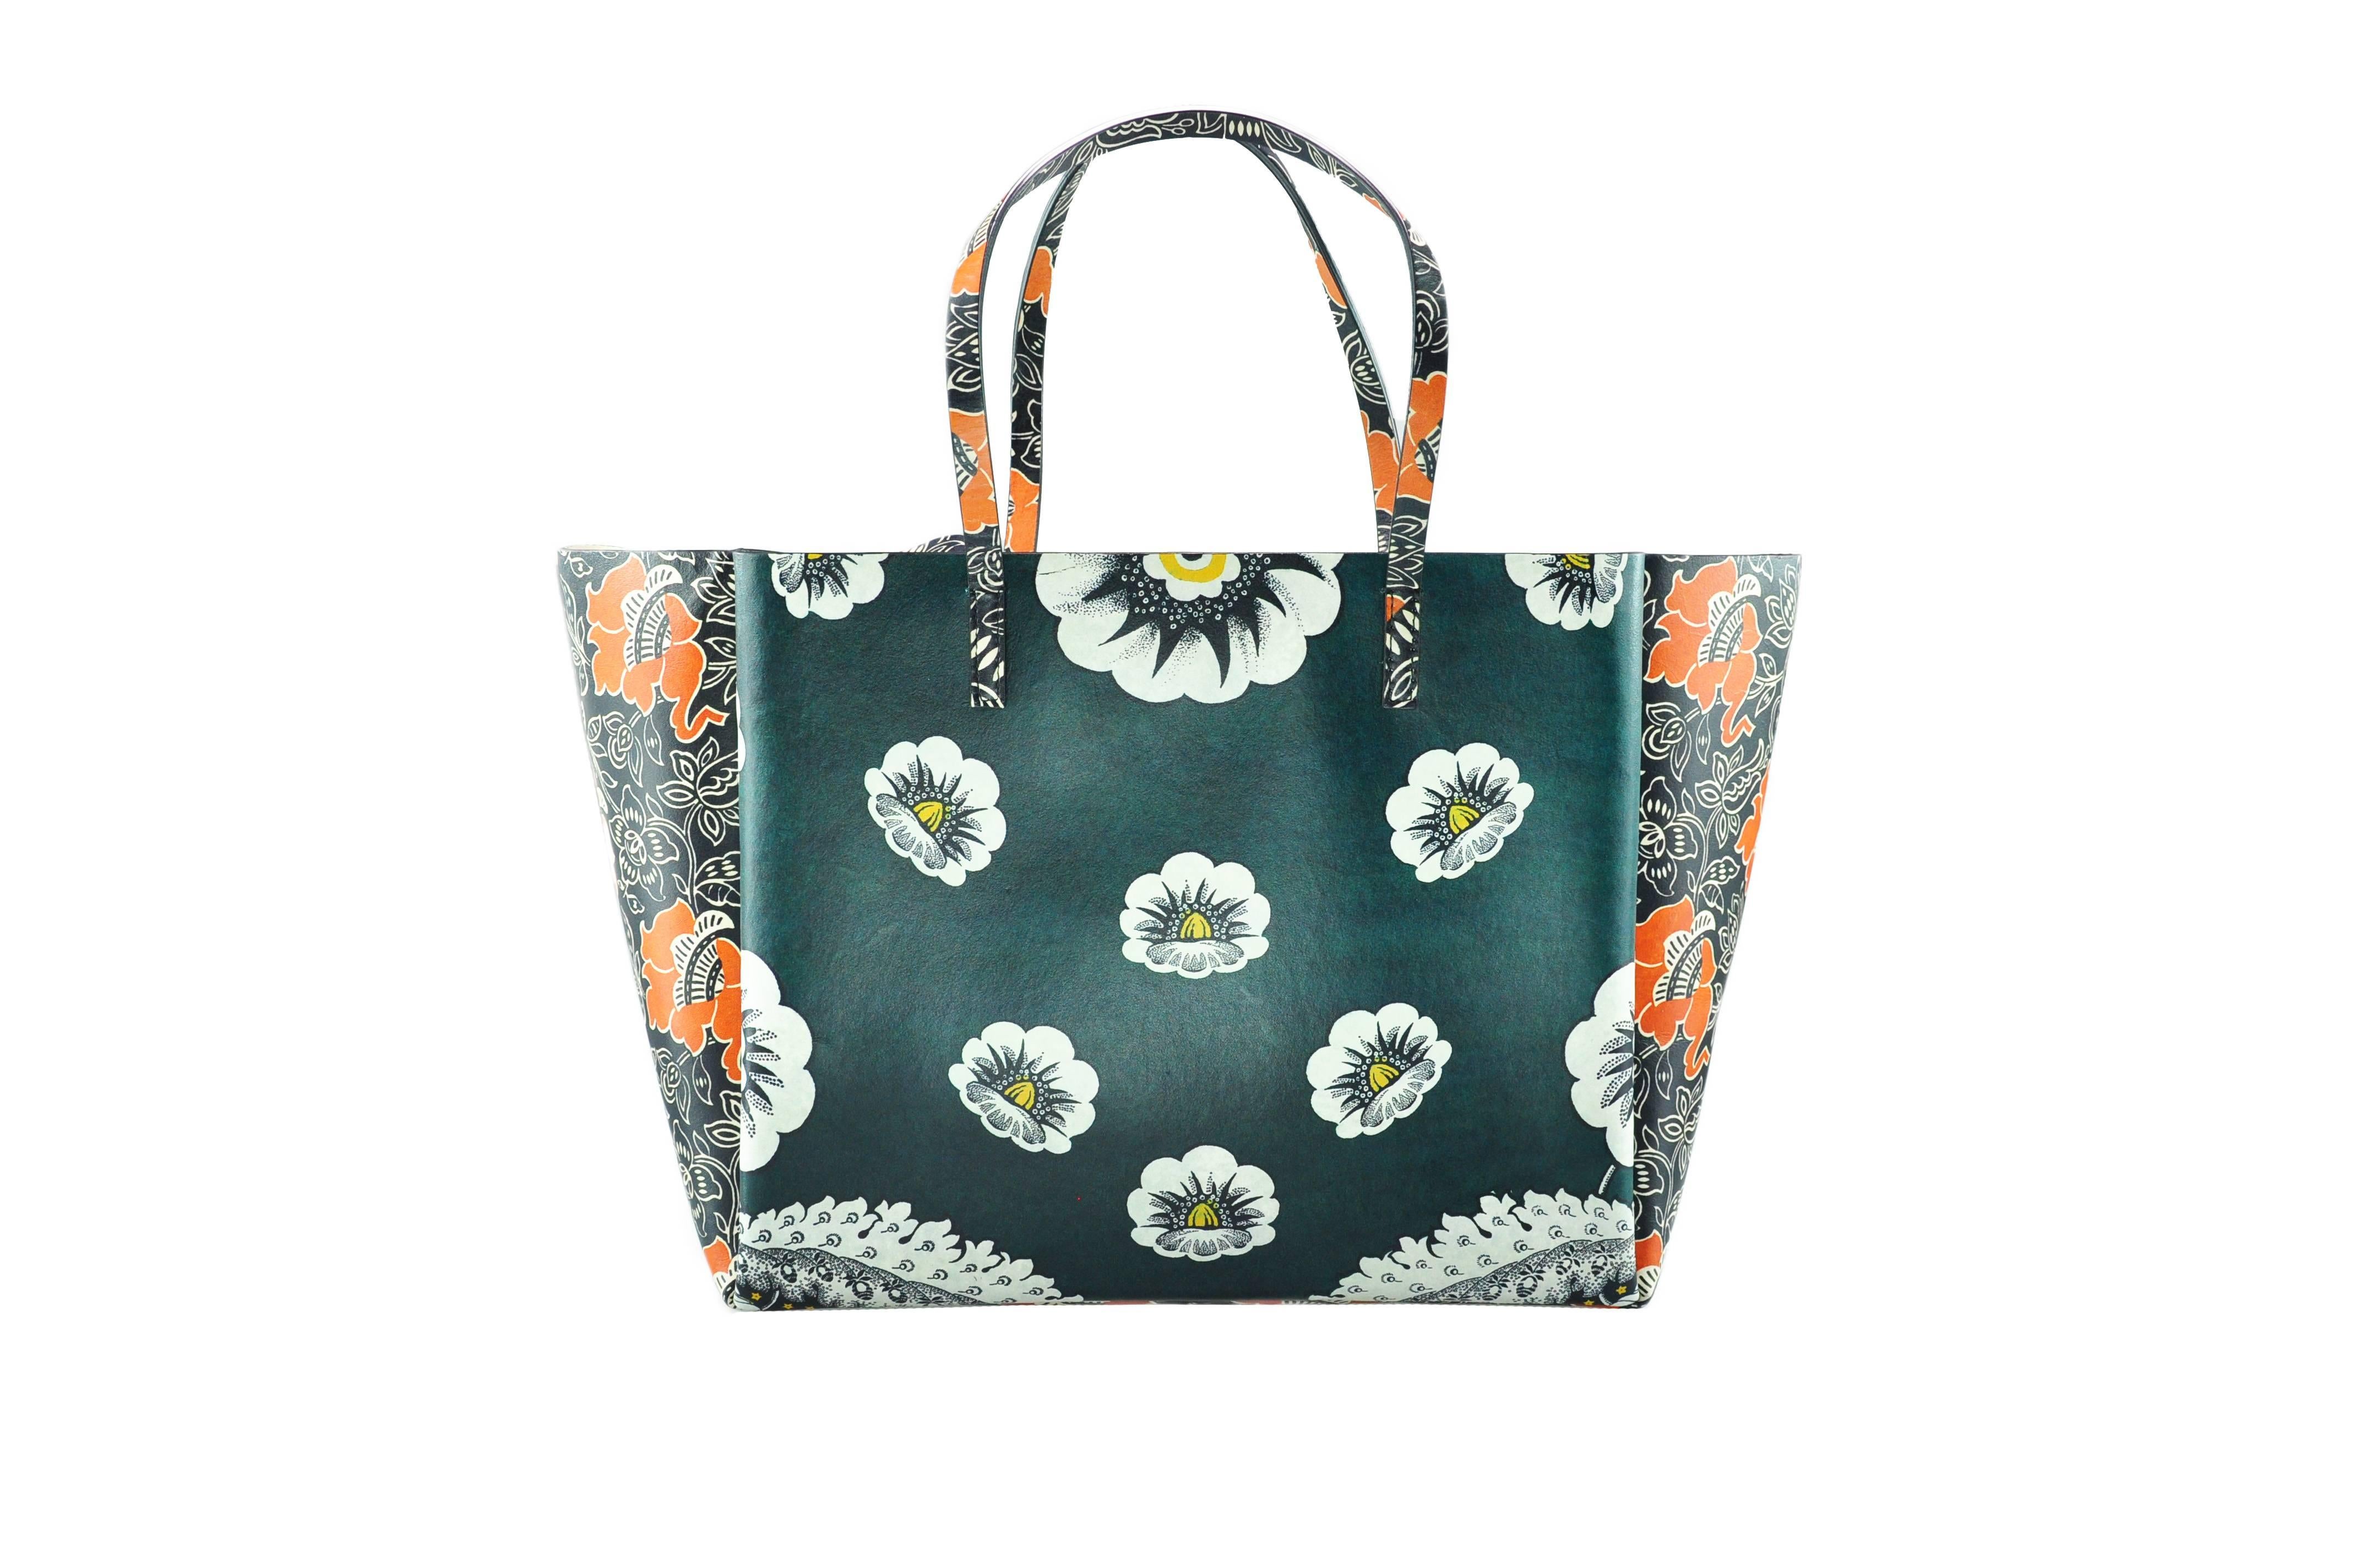 This Valentino Mime tote bag is inspired by the blossoming spring with floral printed patch-work leather.  The sophisticated prints are made with love, embedded into the handbag. Two spacious outer compartments with snap closure and one large zipper